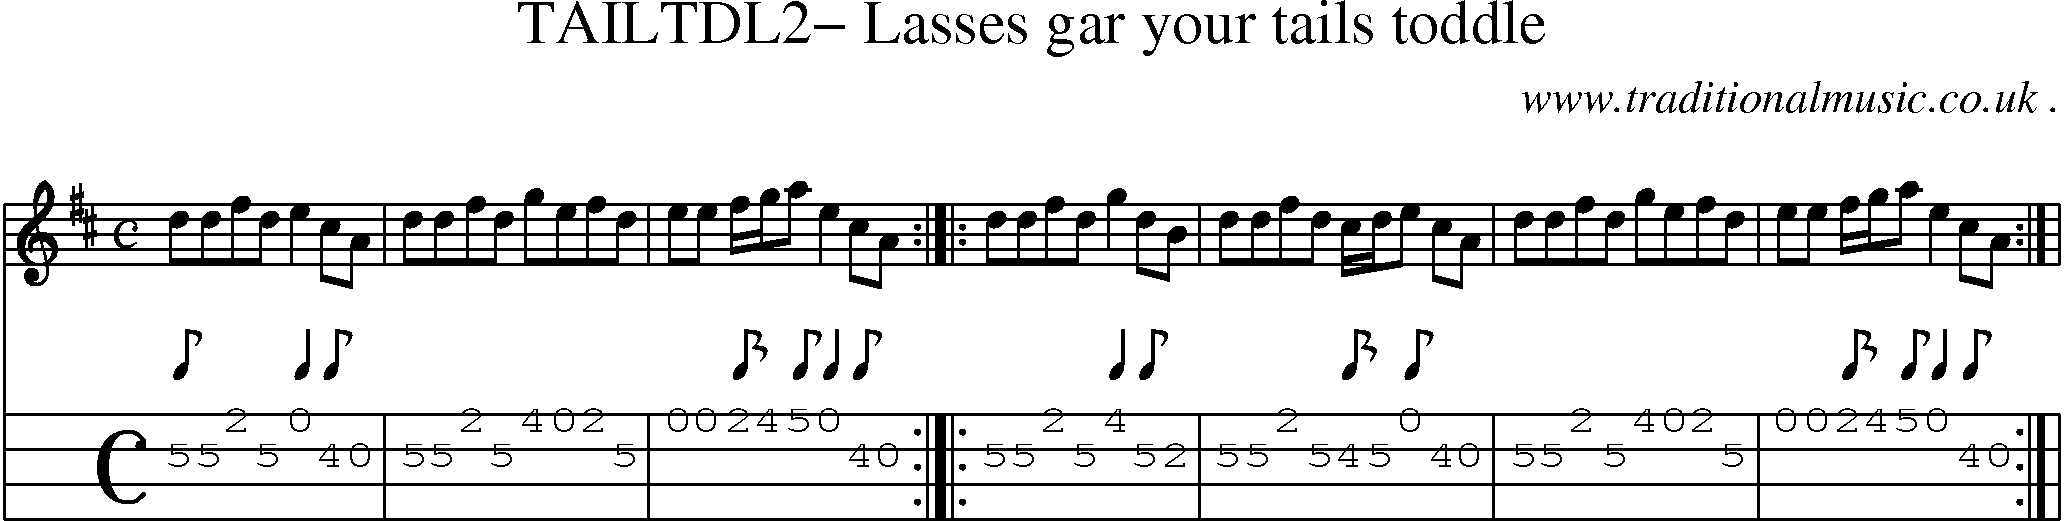 Sheet-Music and Mandolin Tabs for Tailtdl2 Lasses Gar Your Tails Toddle